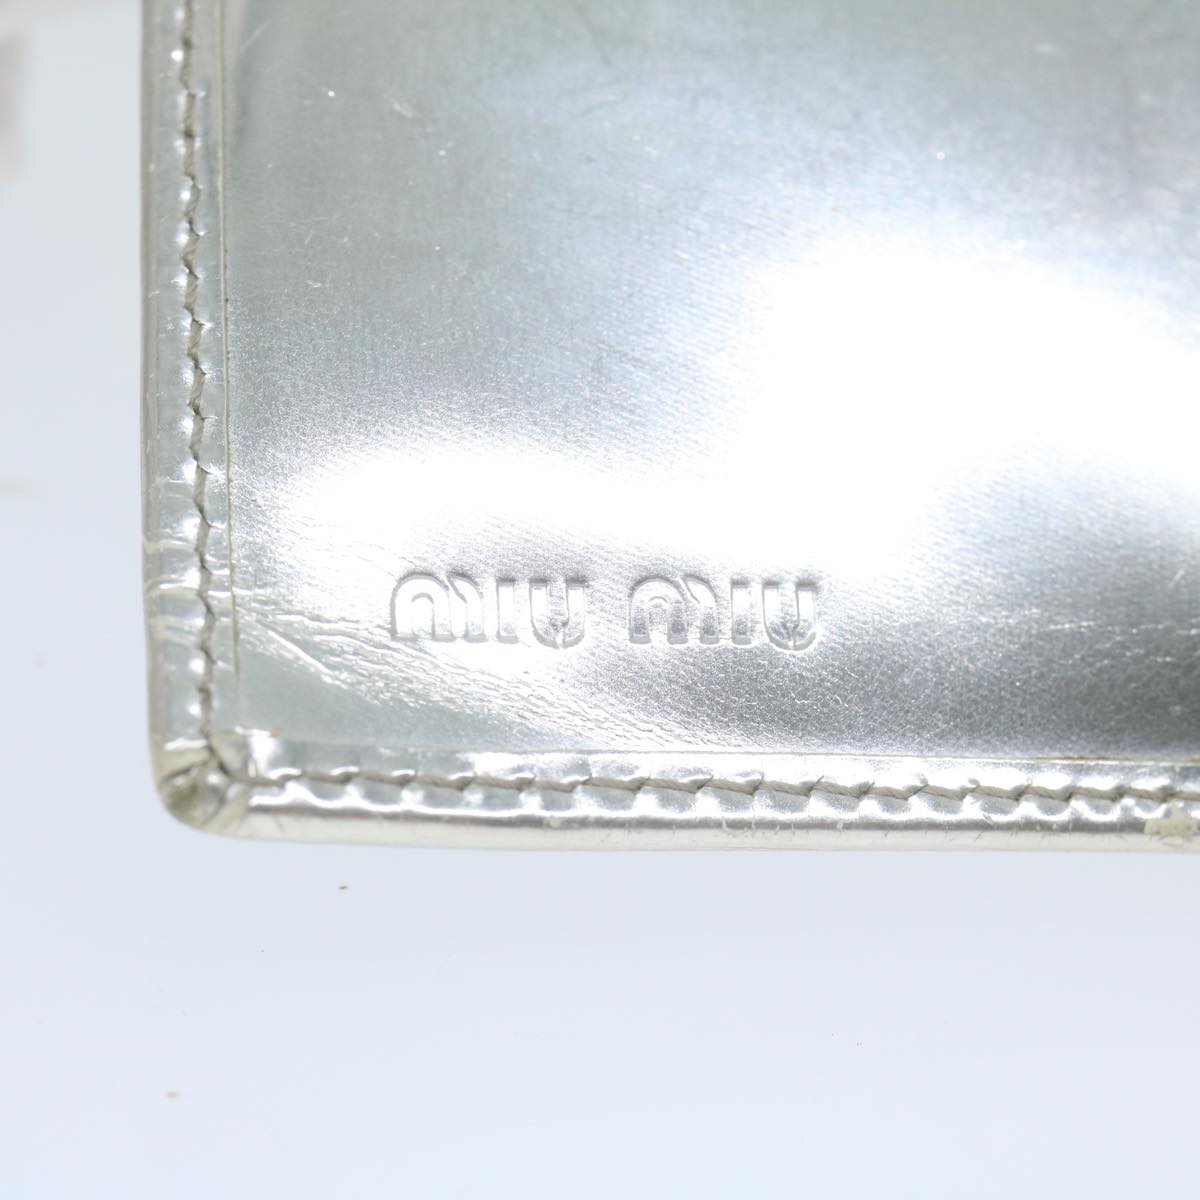 Miu Miu Chain Wallet Patent leather Silver Auth hk979